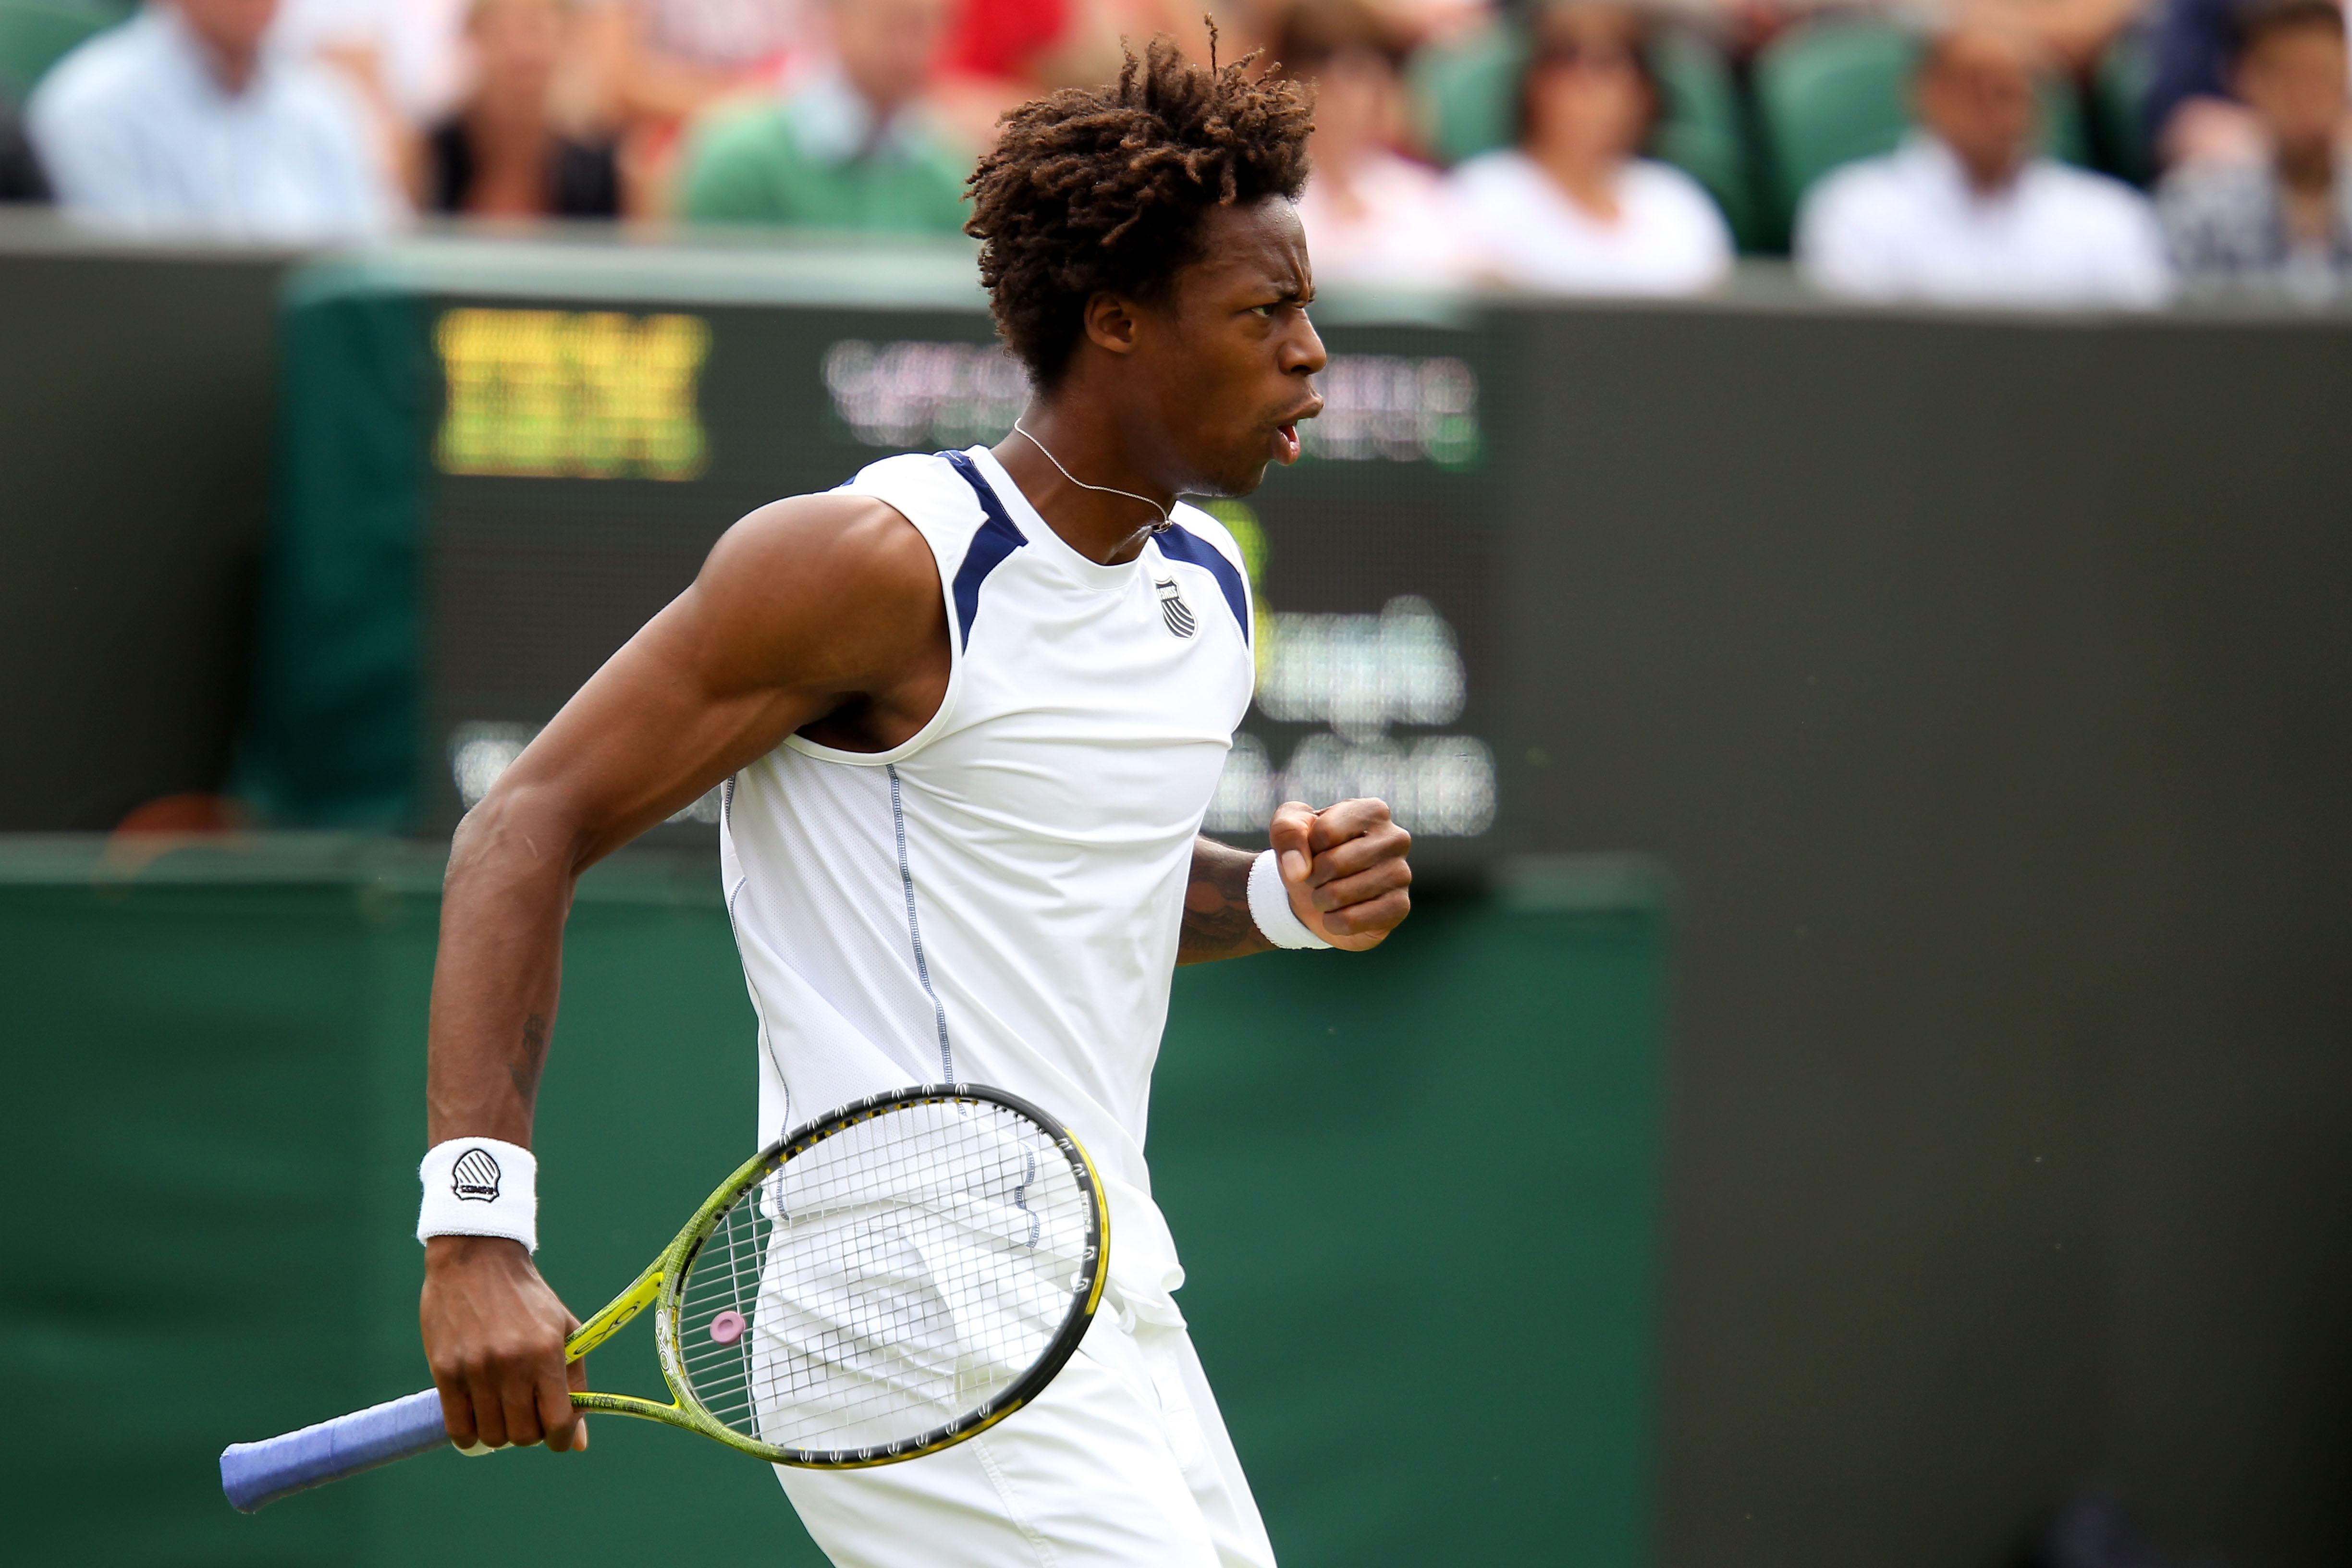 LONDON, ENGLAND - JUNE 20:  Gael Monfils of France reacts to a play during his first round match against Matthias Bachinger of Germany on Day One of the Wimbledon Lawn Tennis Championships at the All England Lawn Tennis and Croquet Club on June 20, 2011 i